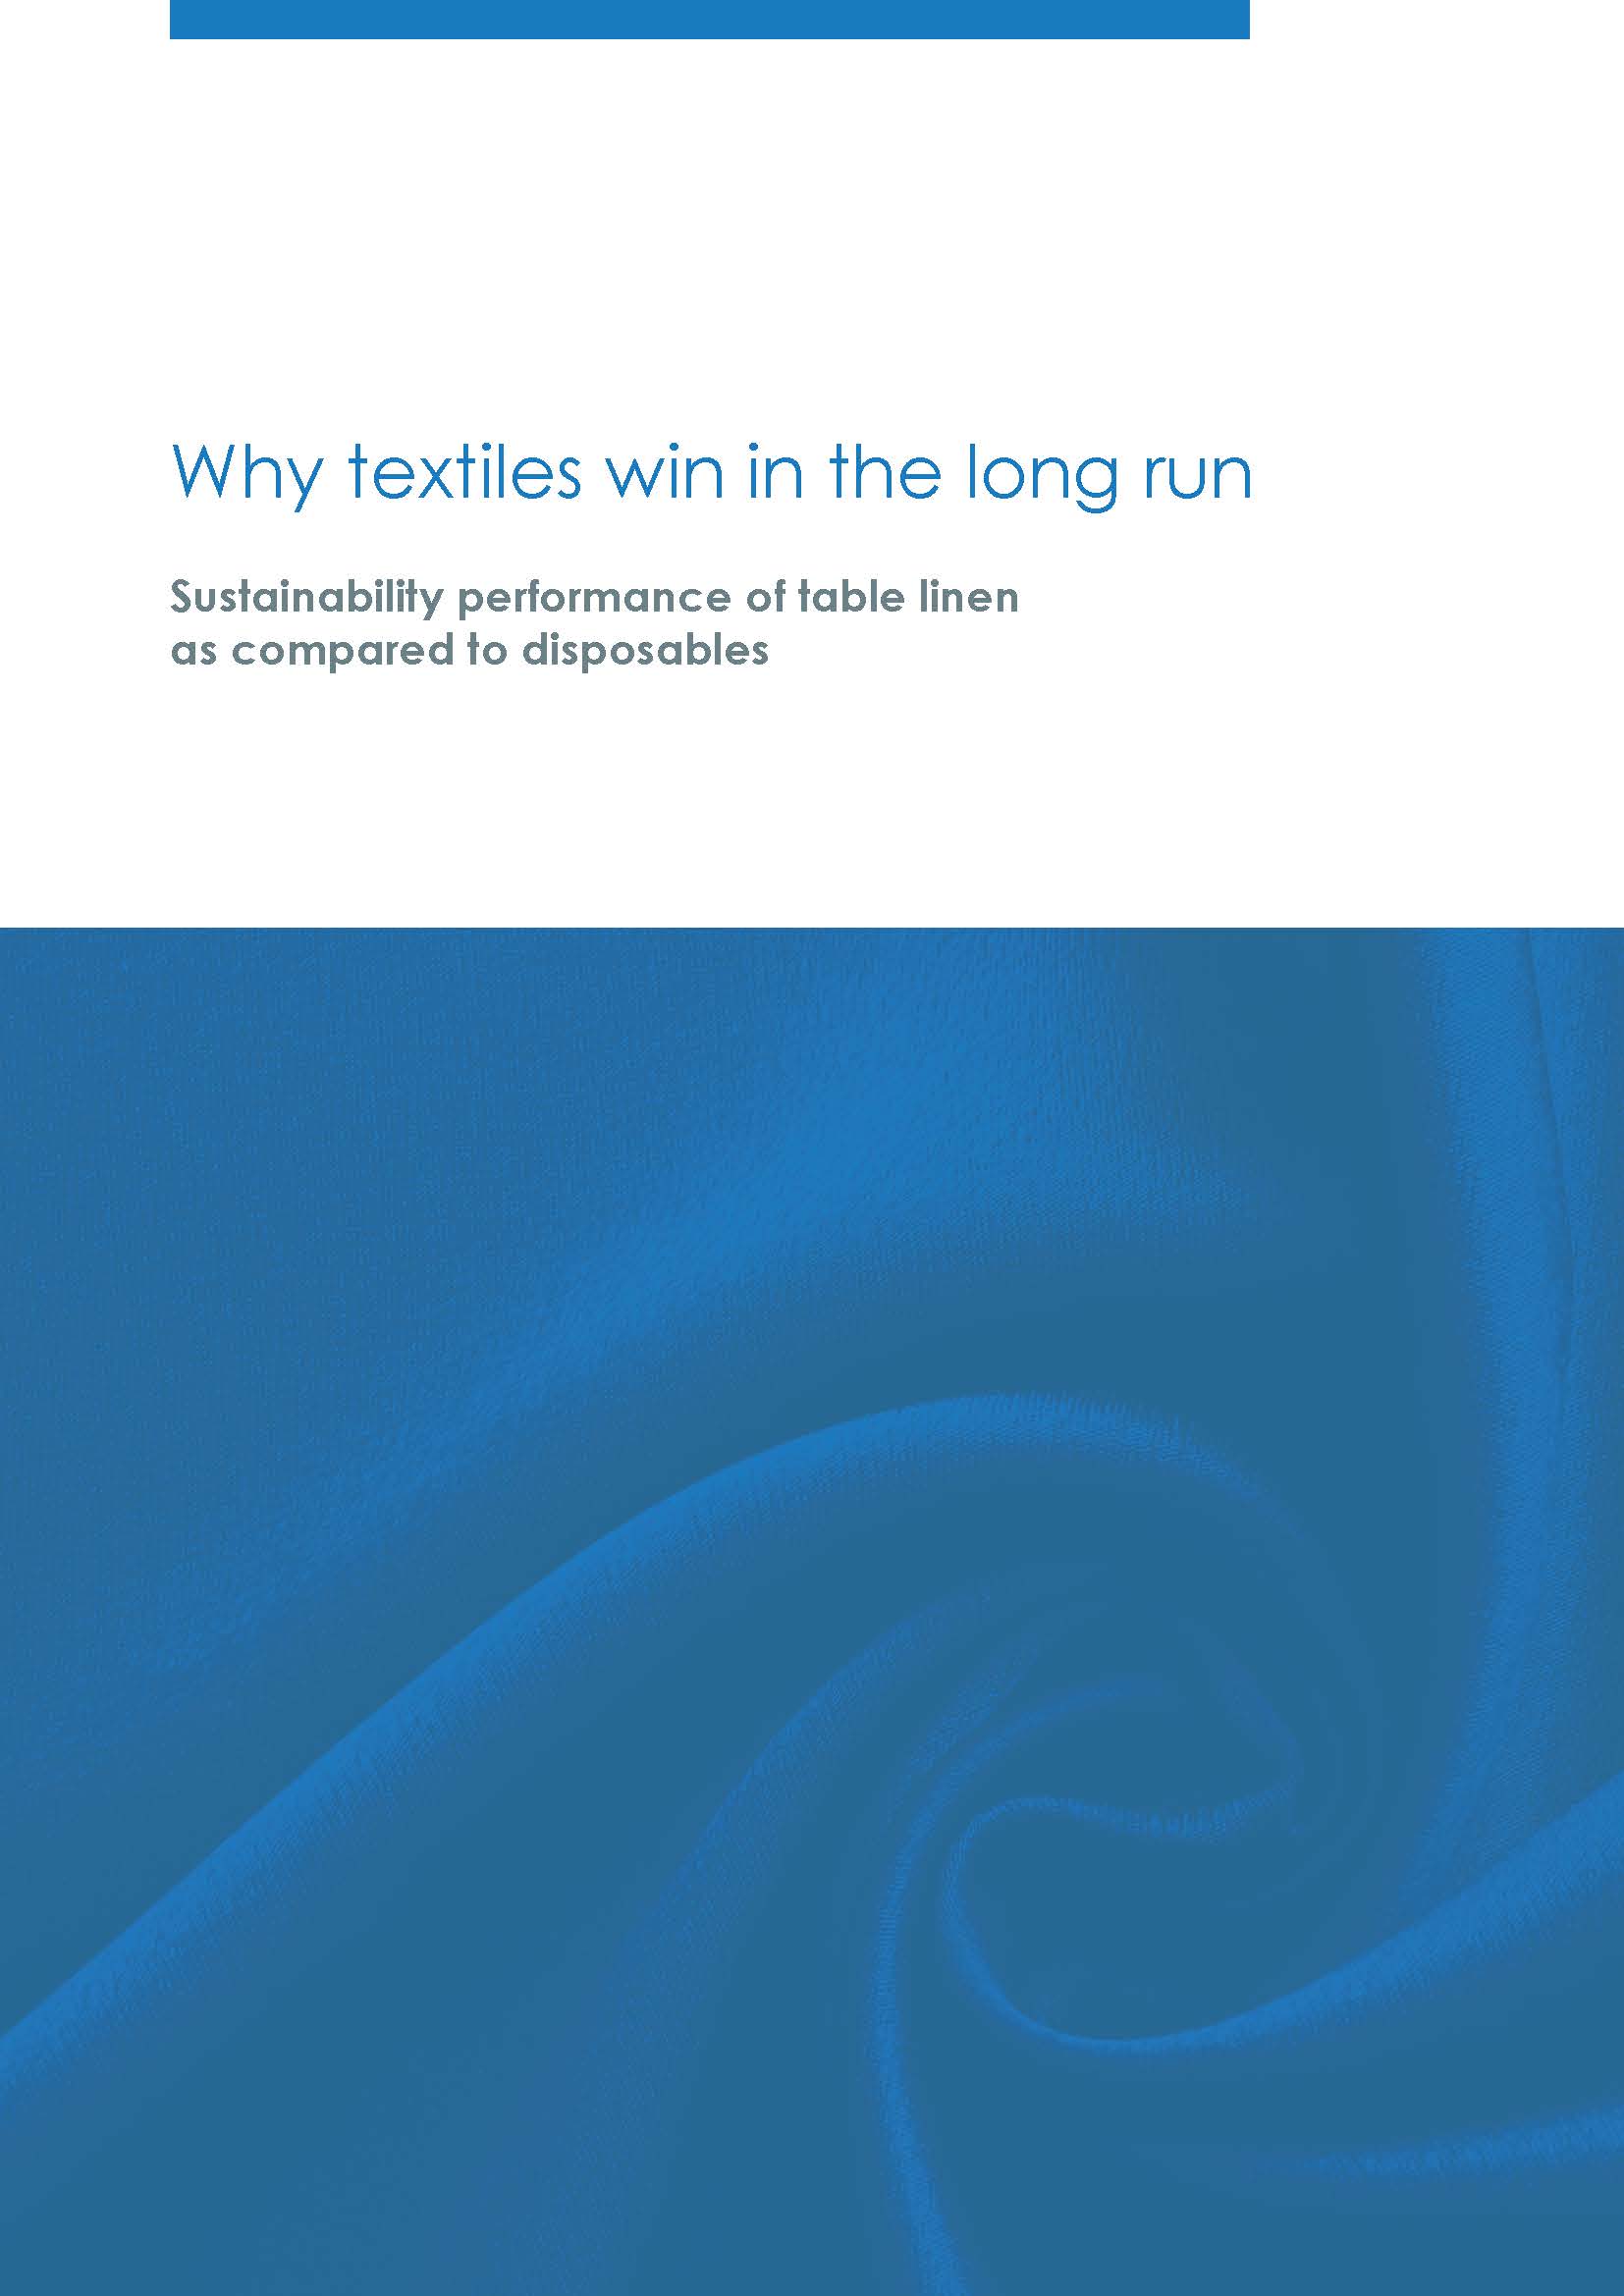 Why Textiles Win in the Long Run